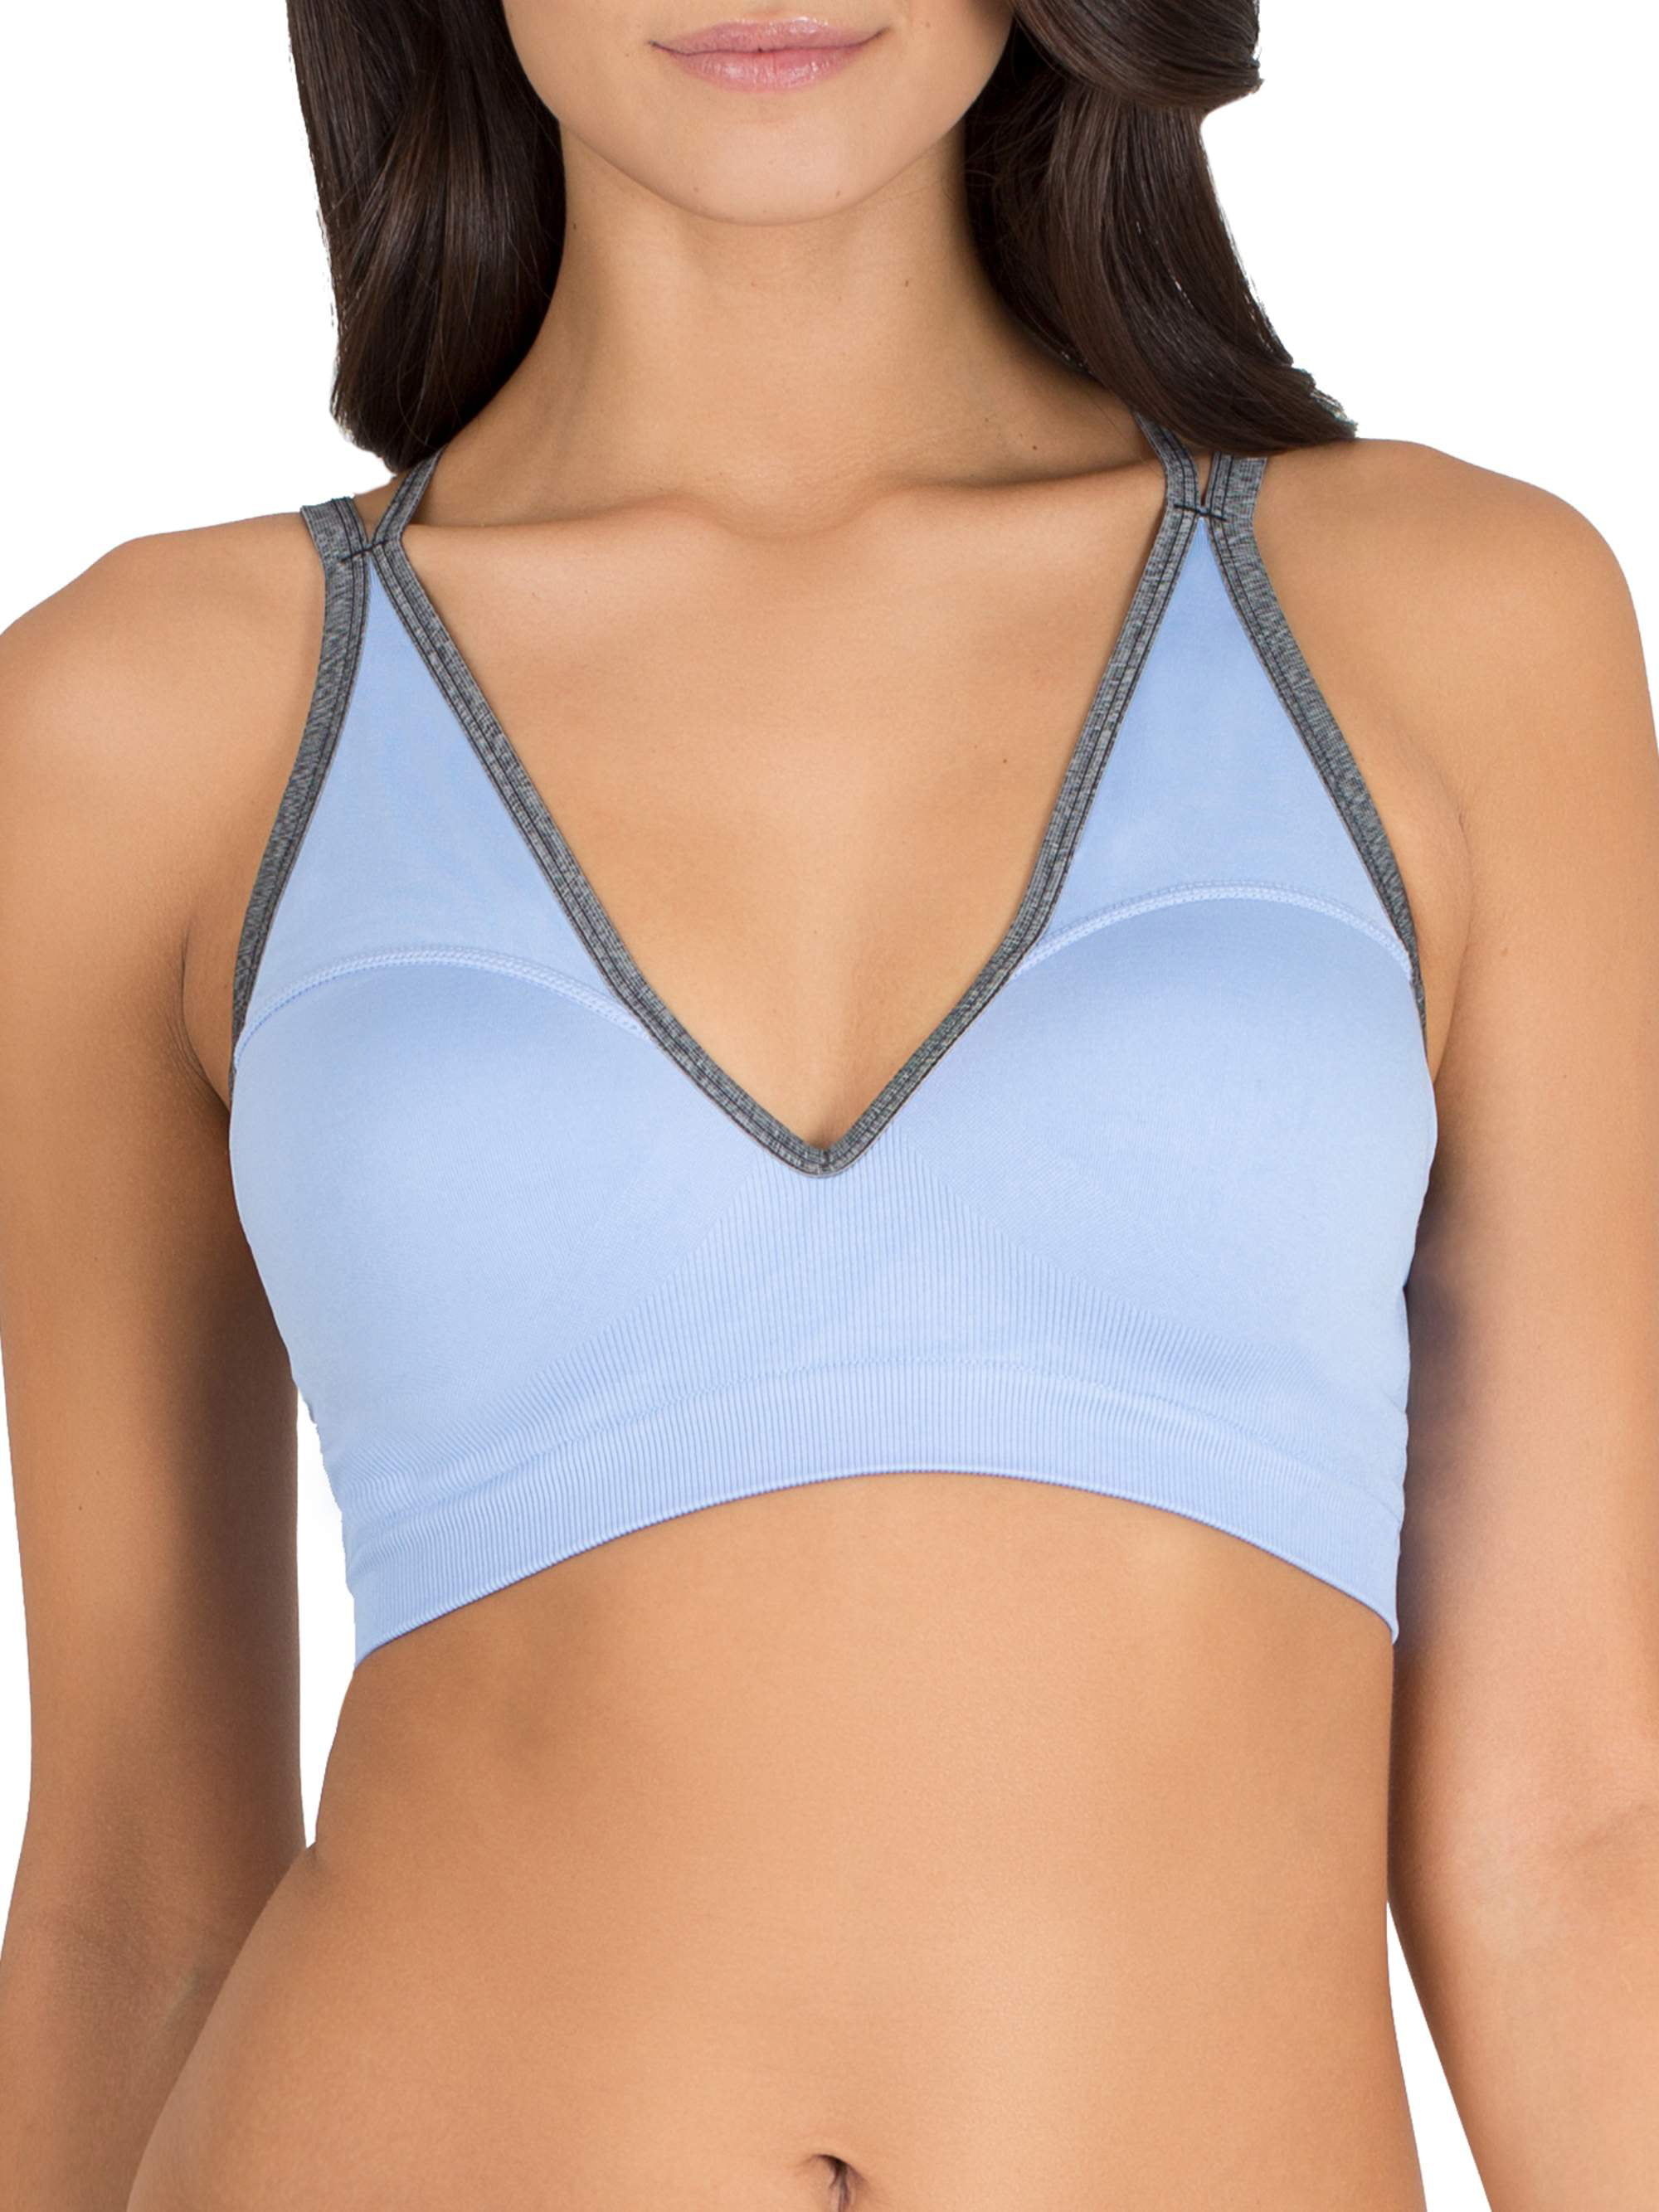 A Fresh Collection Junior's Strappy Push-Up Sports Bra, Style FT631